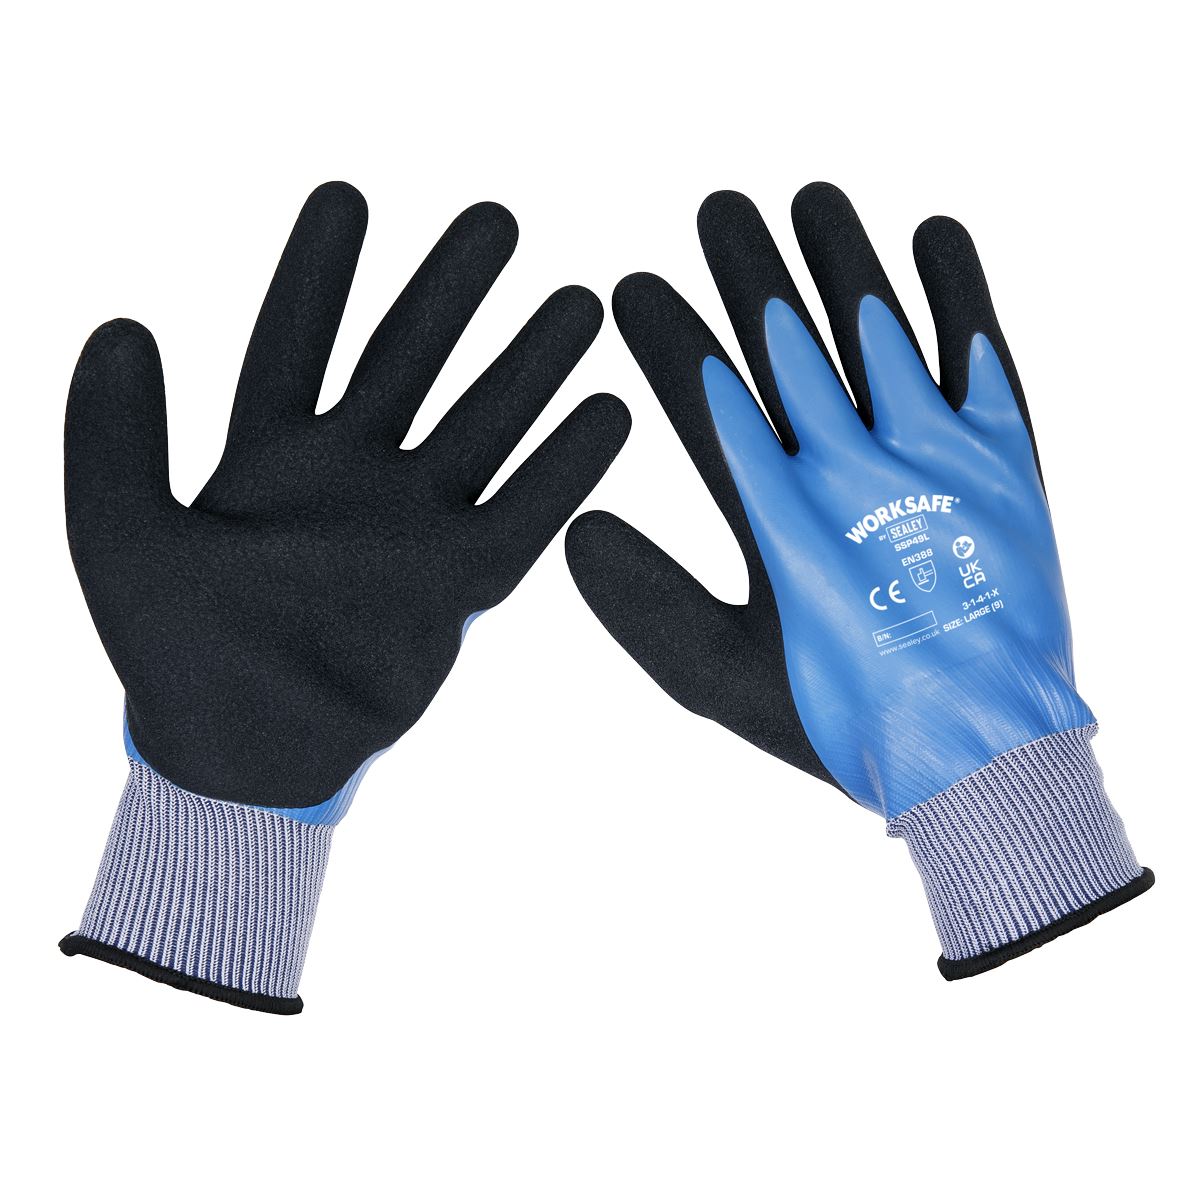 Worksafe by Sealey Waterproof Latex Gloves - (Large) - Box of 120 Pairs